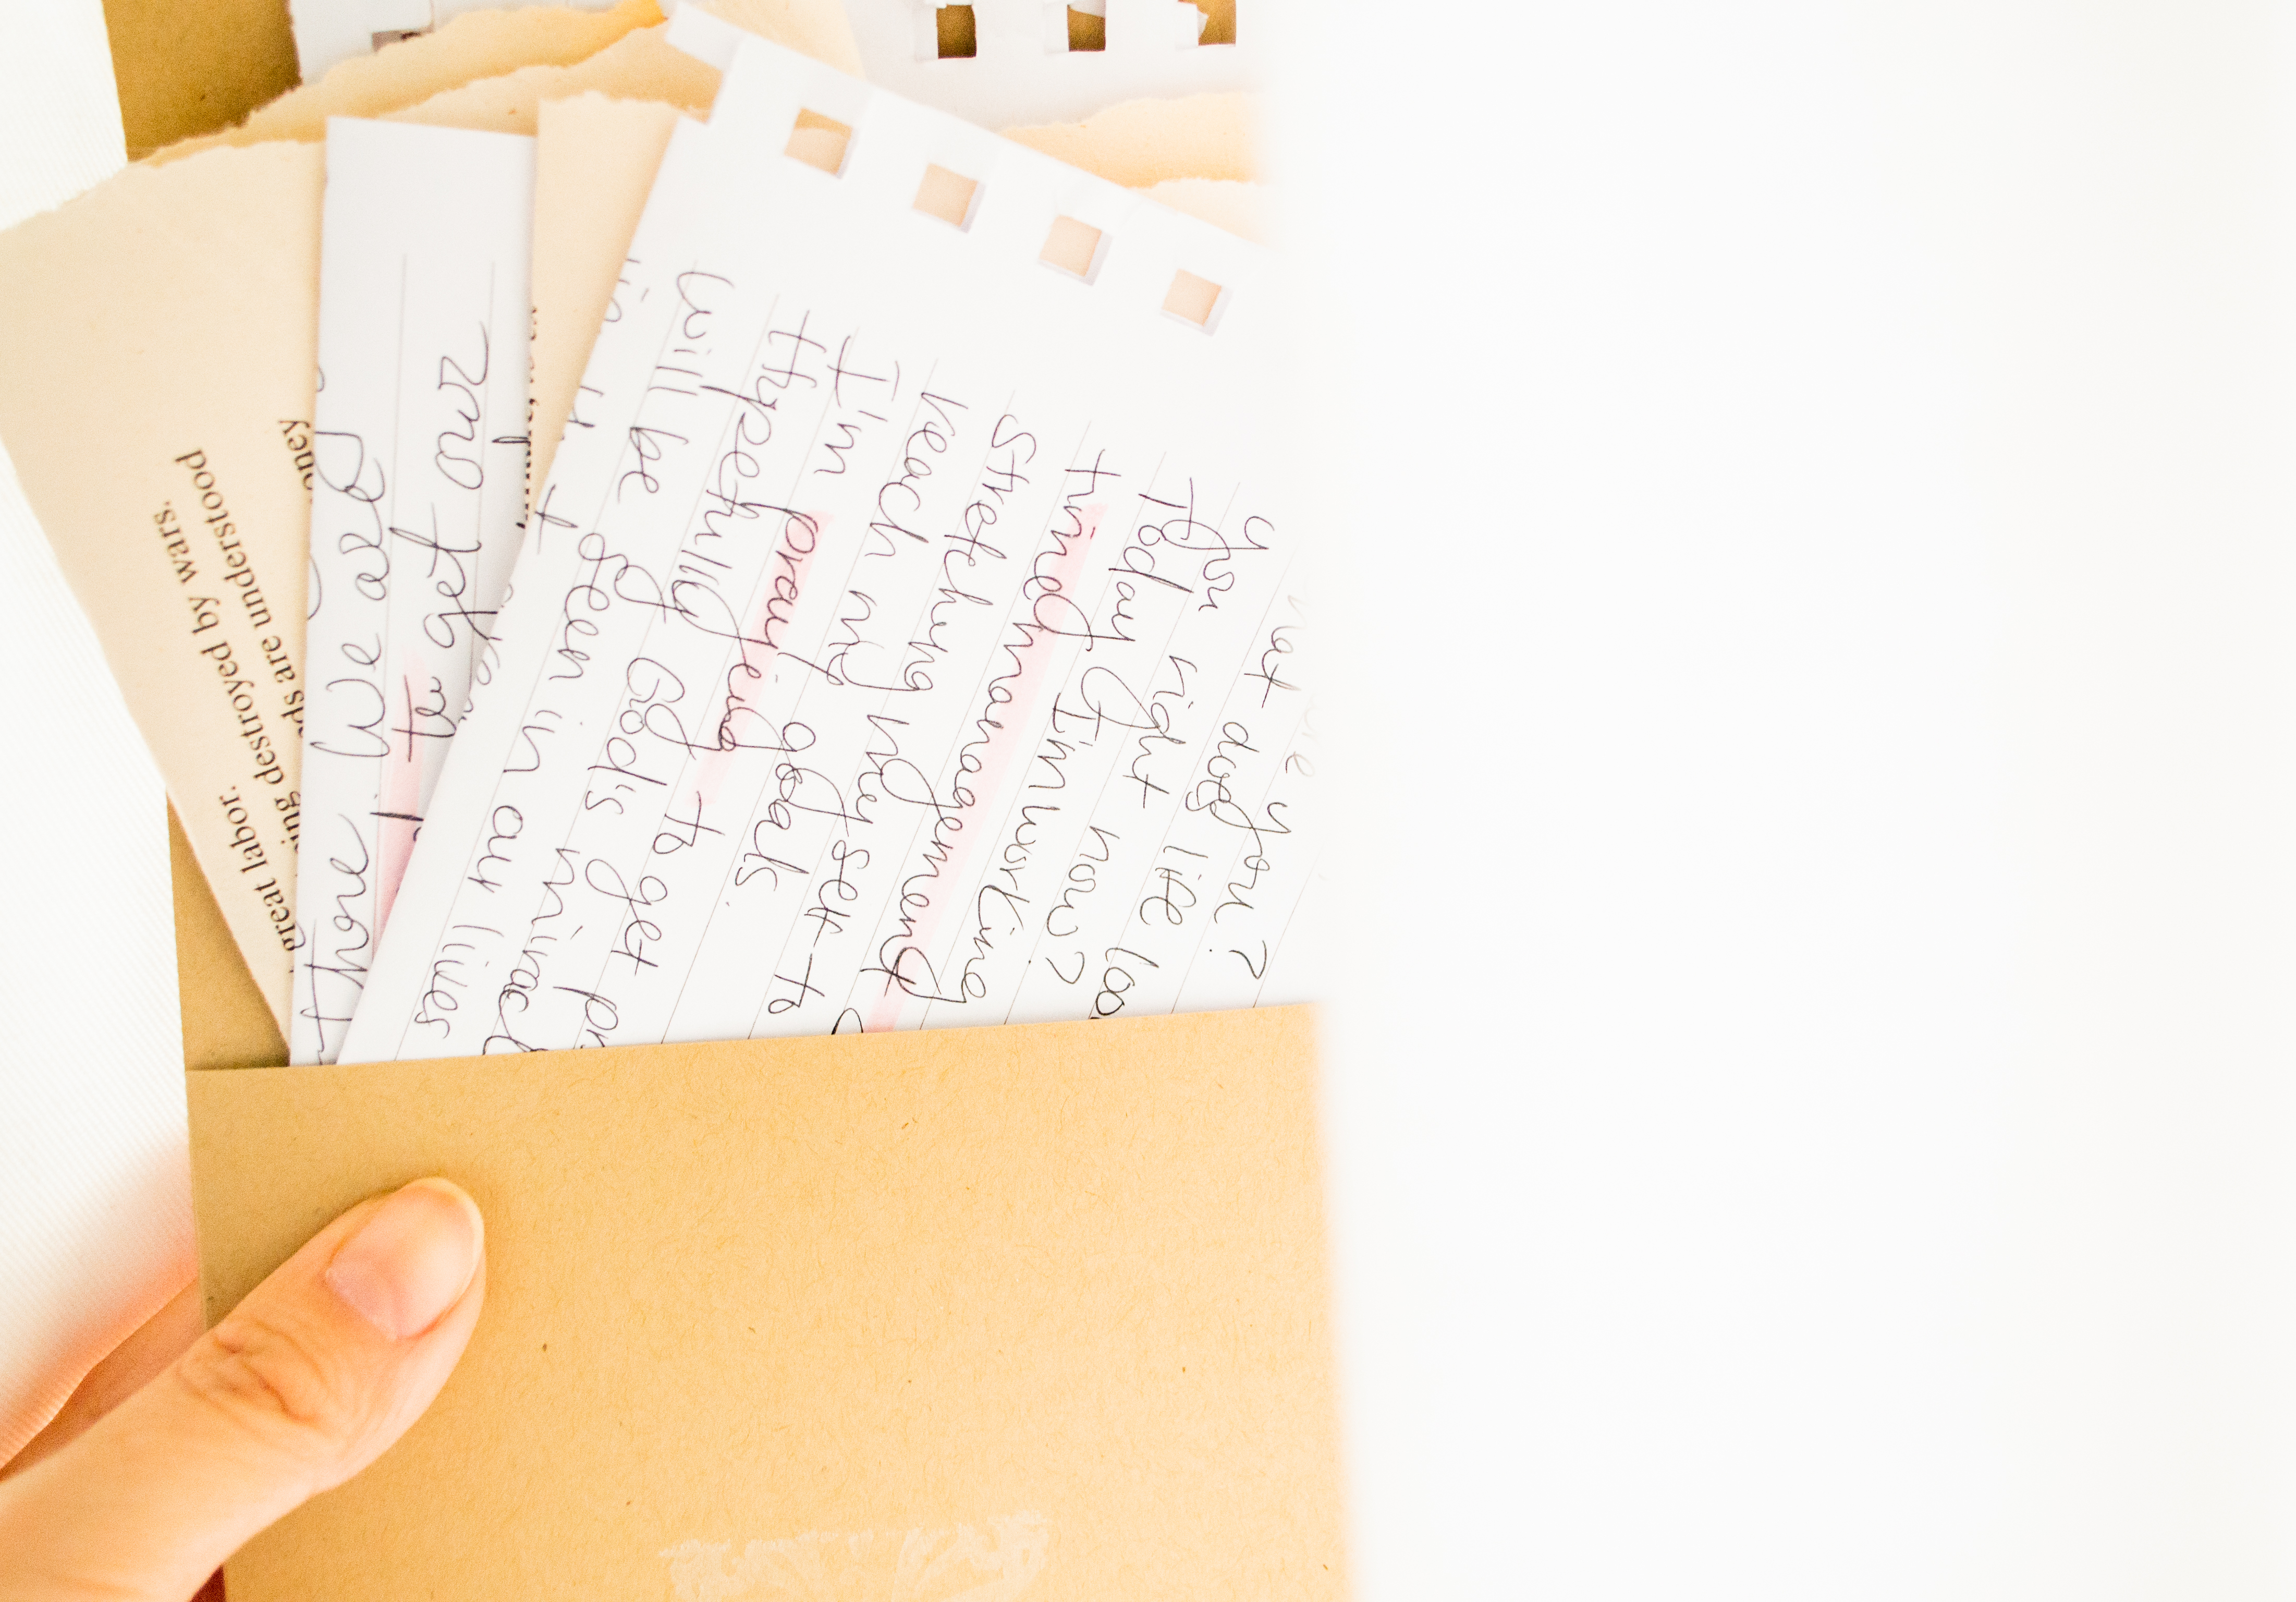 Holding an envelope with hand written note on a white fabric with lots of light